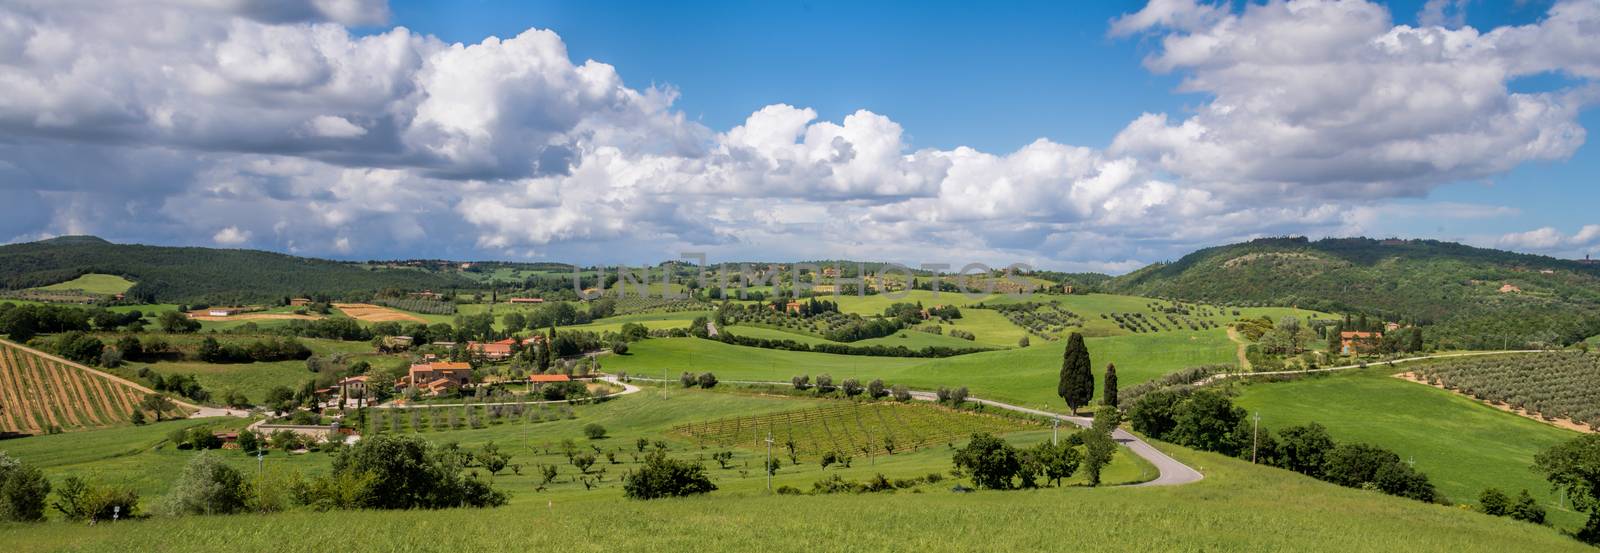 Countryside of Val d'Orcia in Tuscany by phil_bird